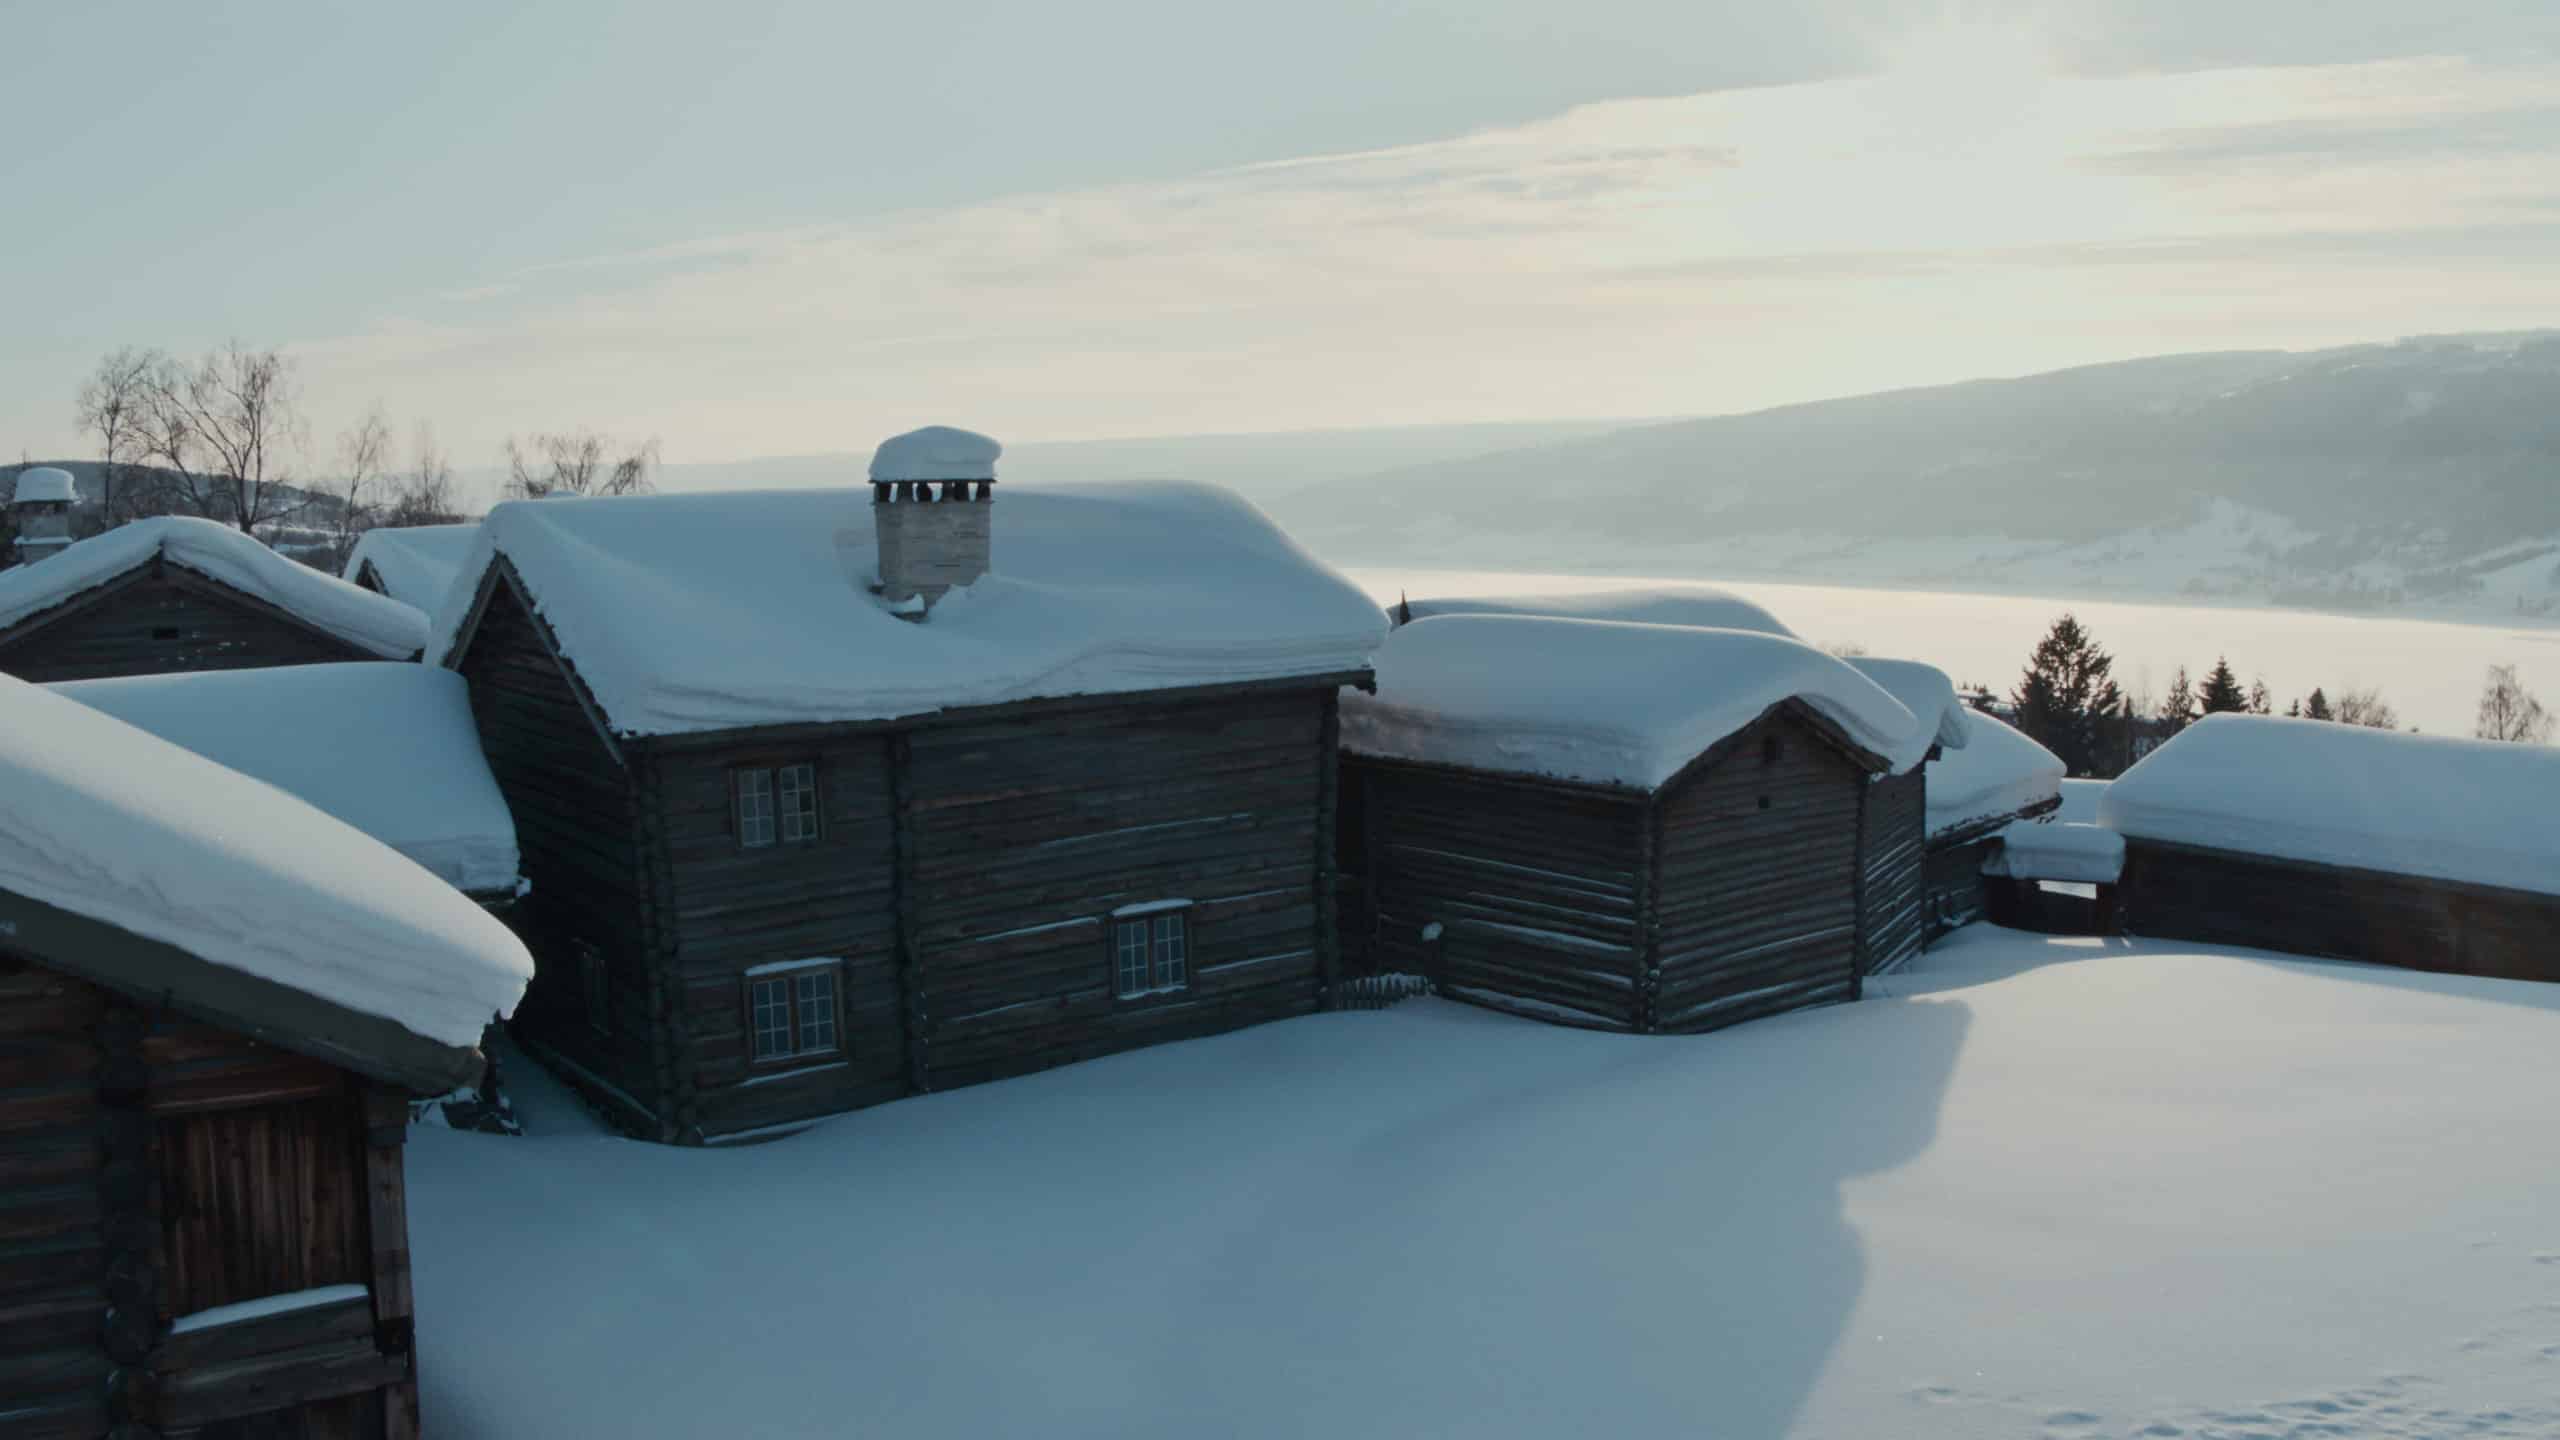 Traditional Norwegian laft wood buildings covered in snow at Maihaugen museum.